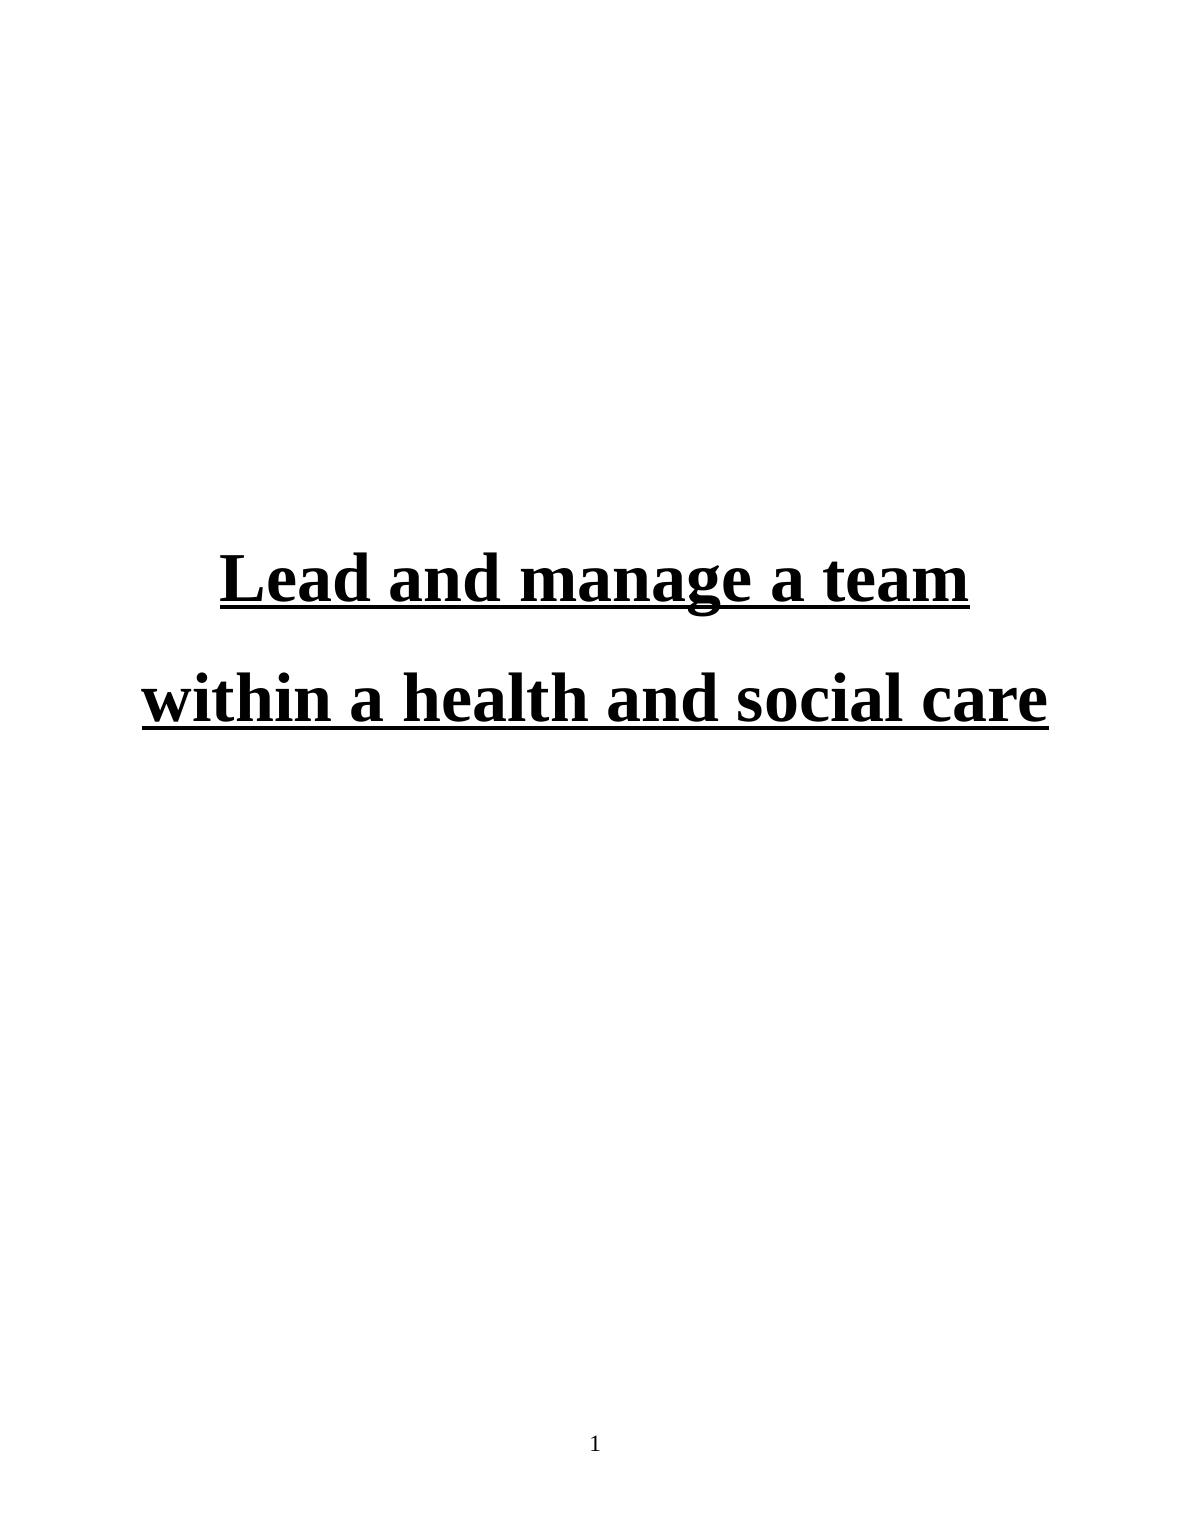 Lead and Manage a Team in Health and Social Care_1